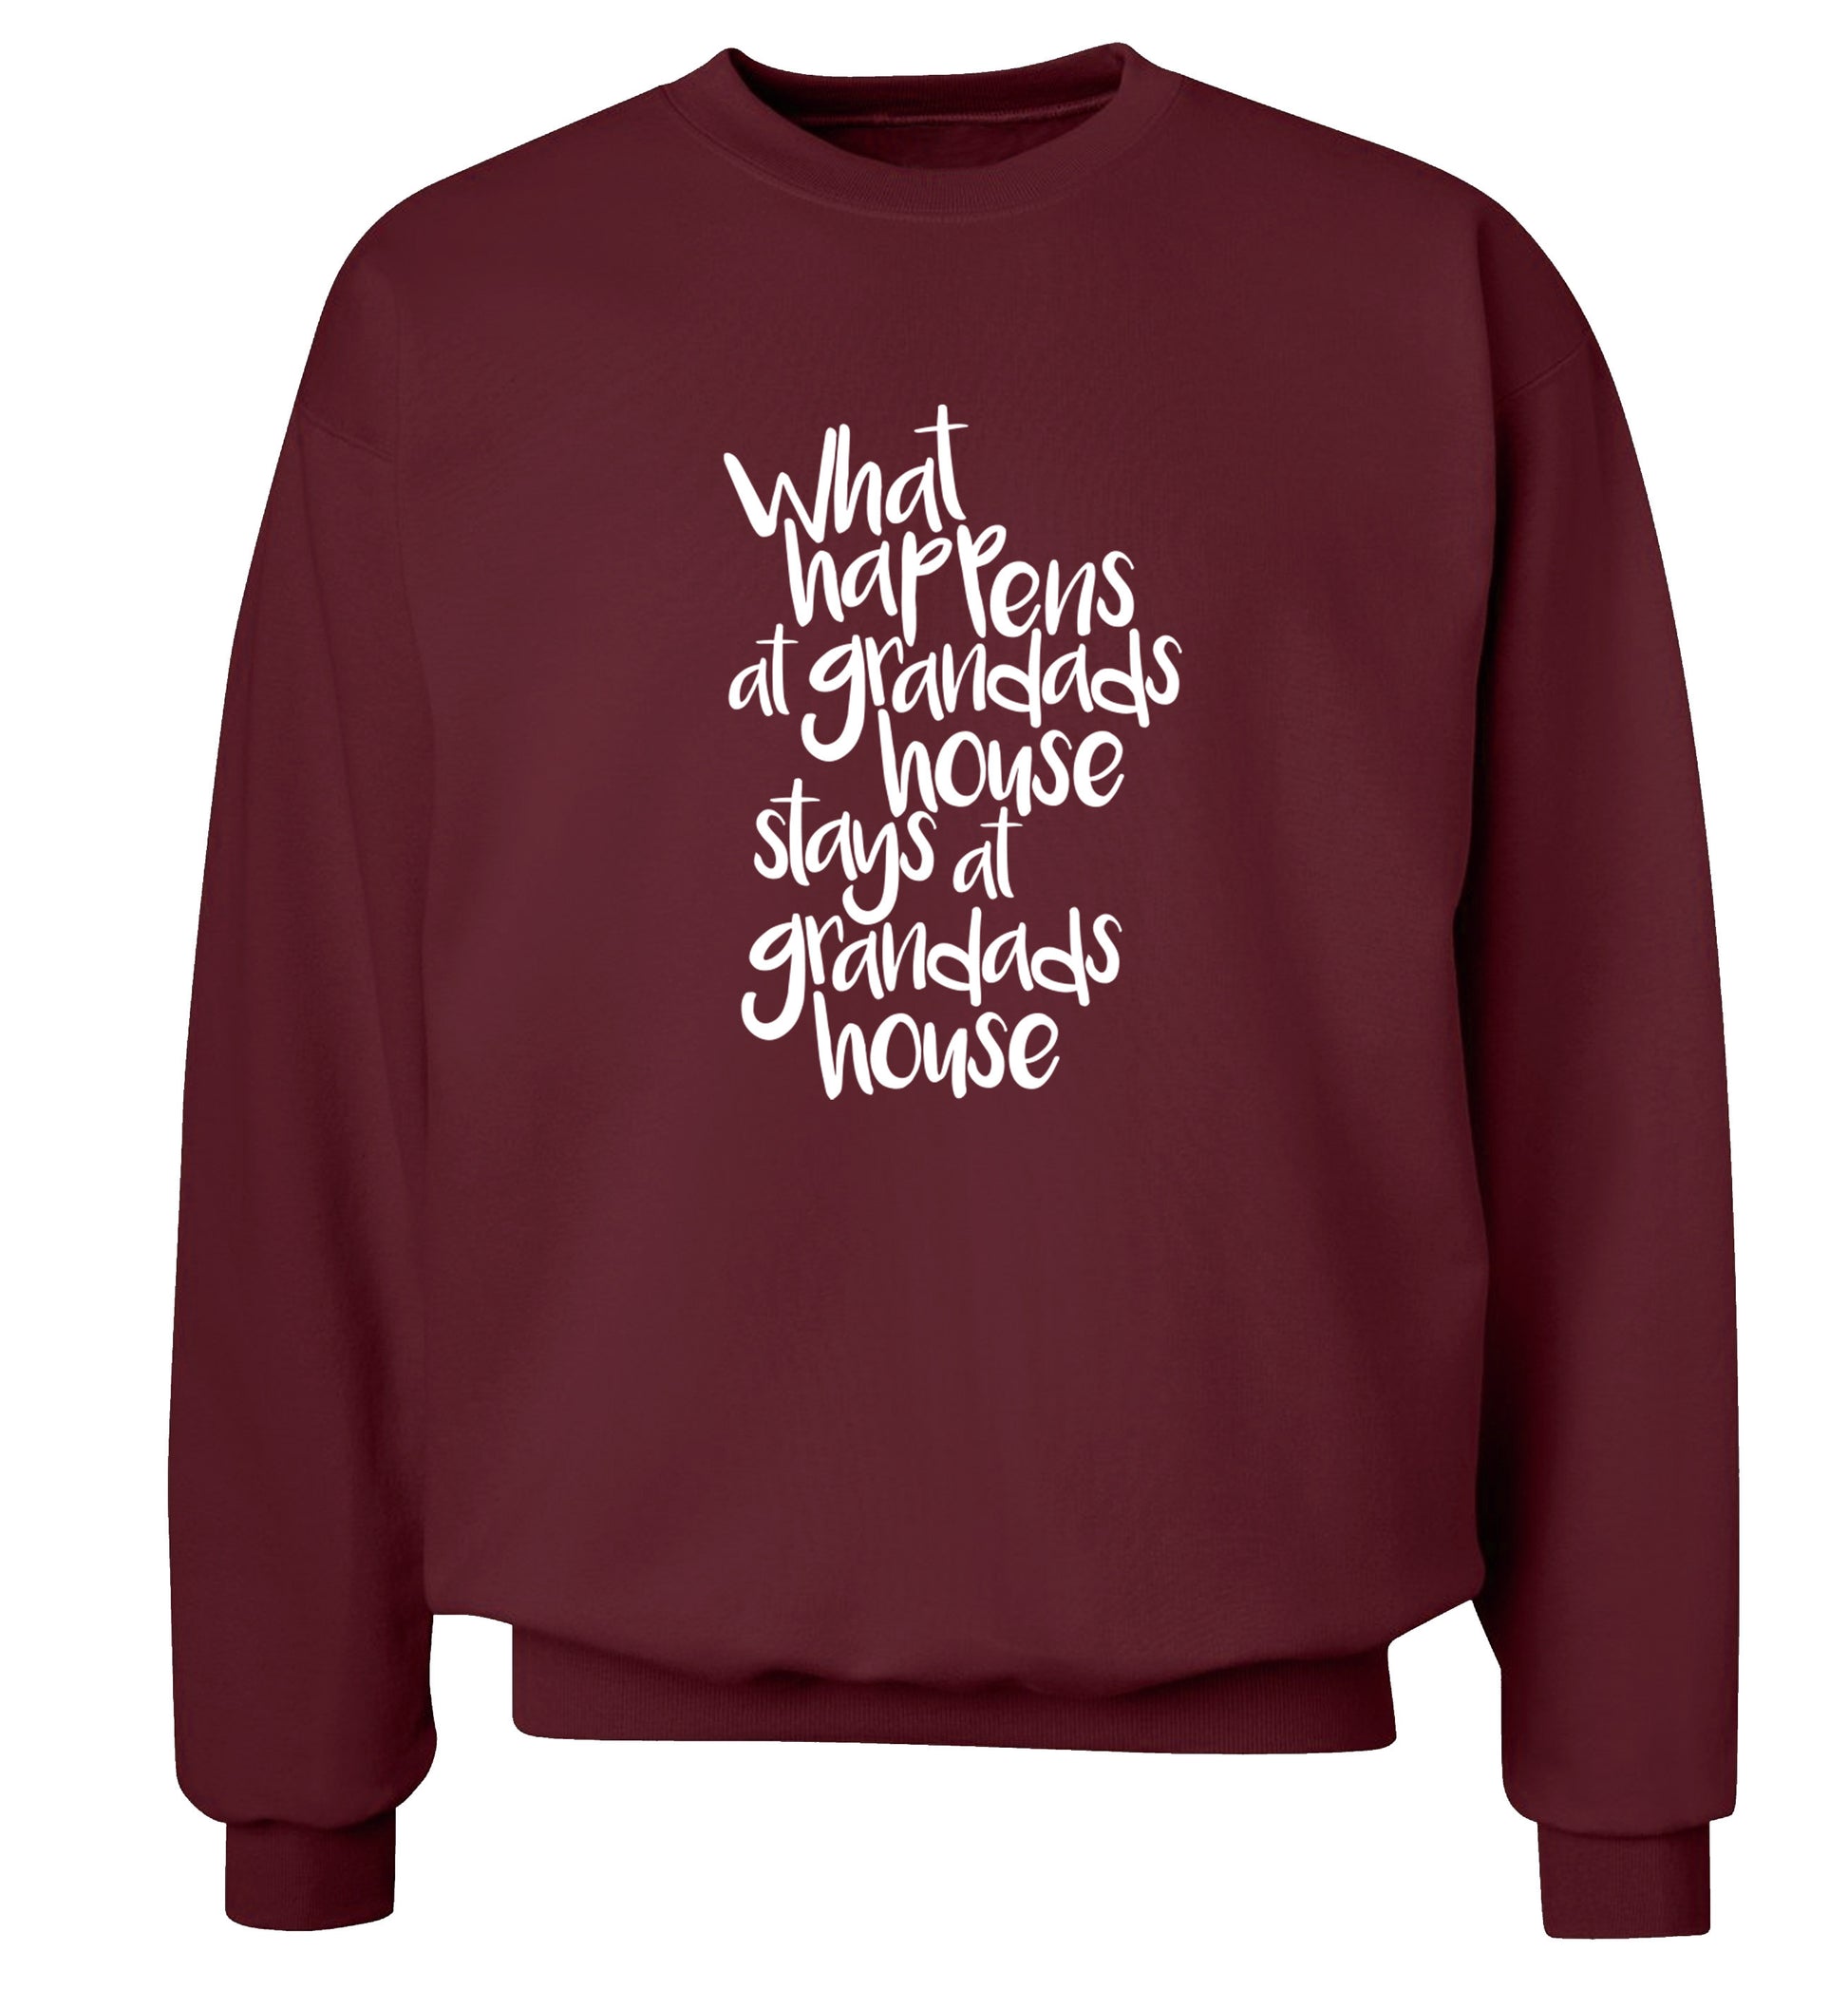 What happens at grandads house stays at grandads house Adult's unisex maroon Sweater 2XL